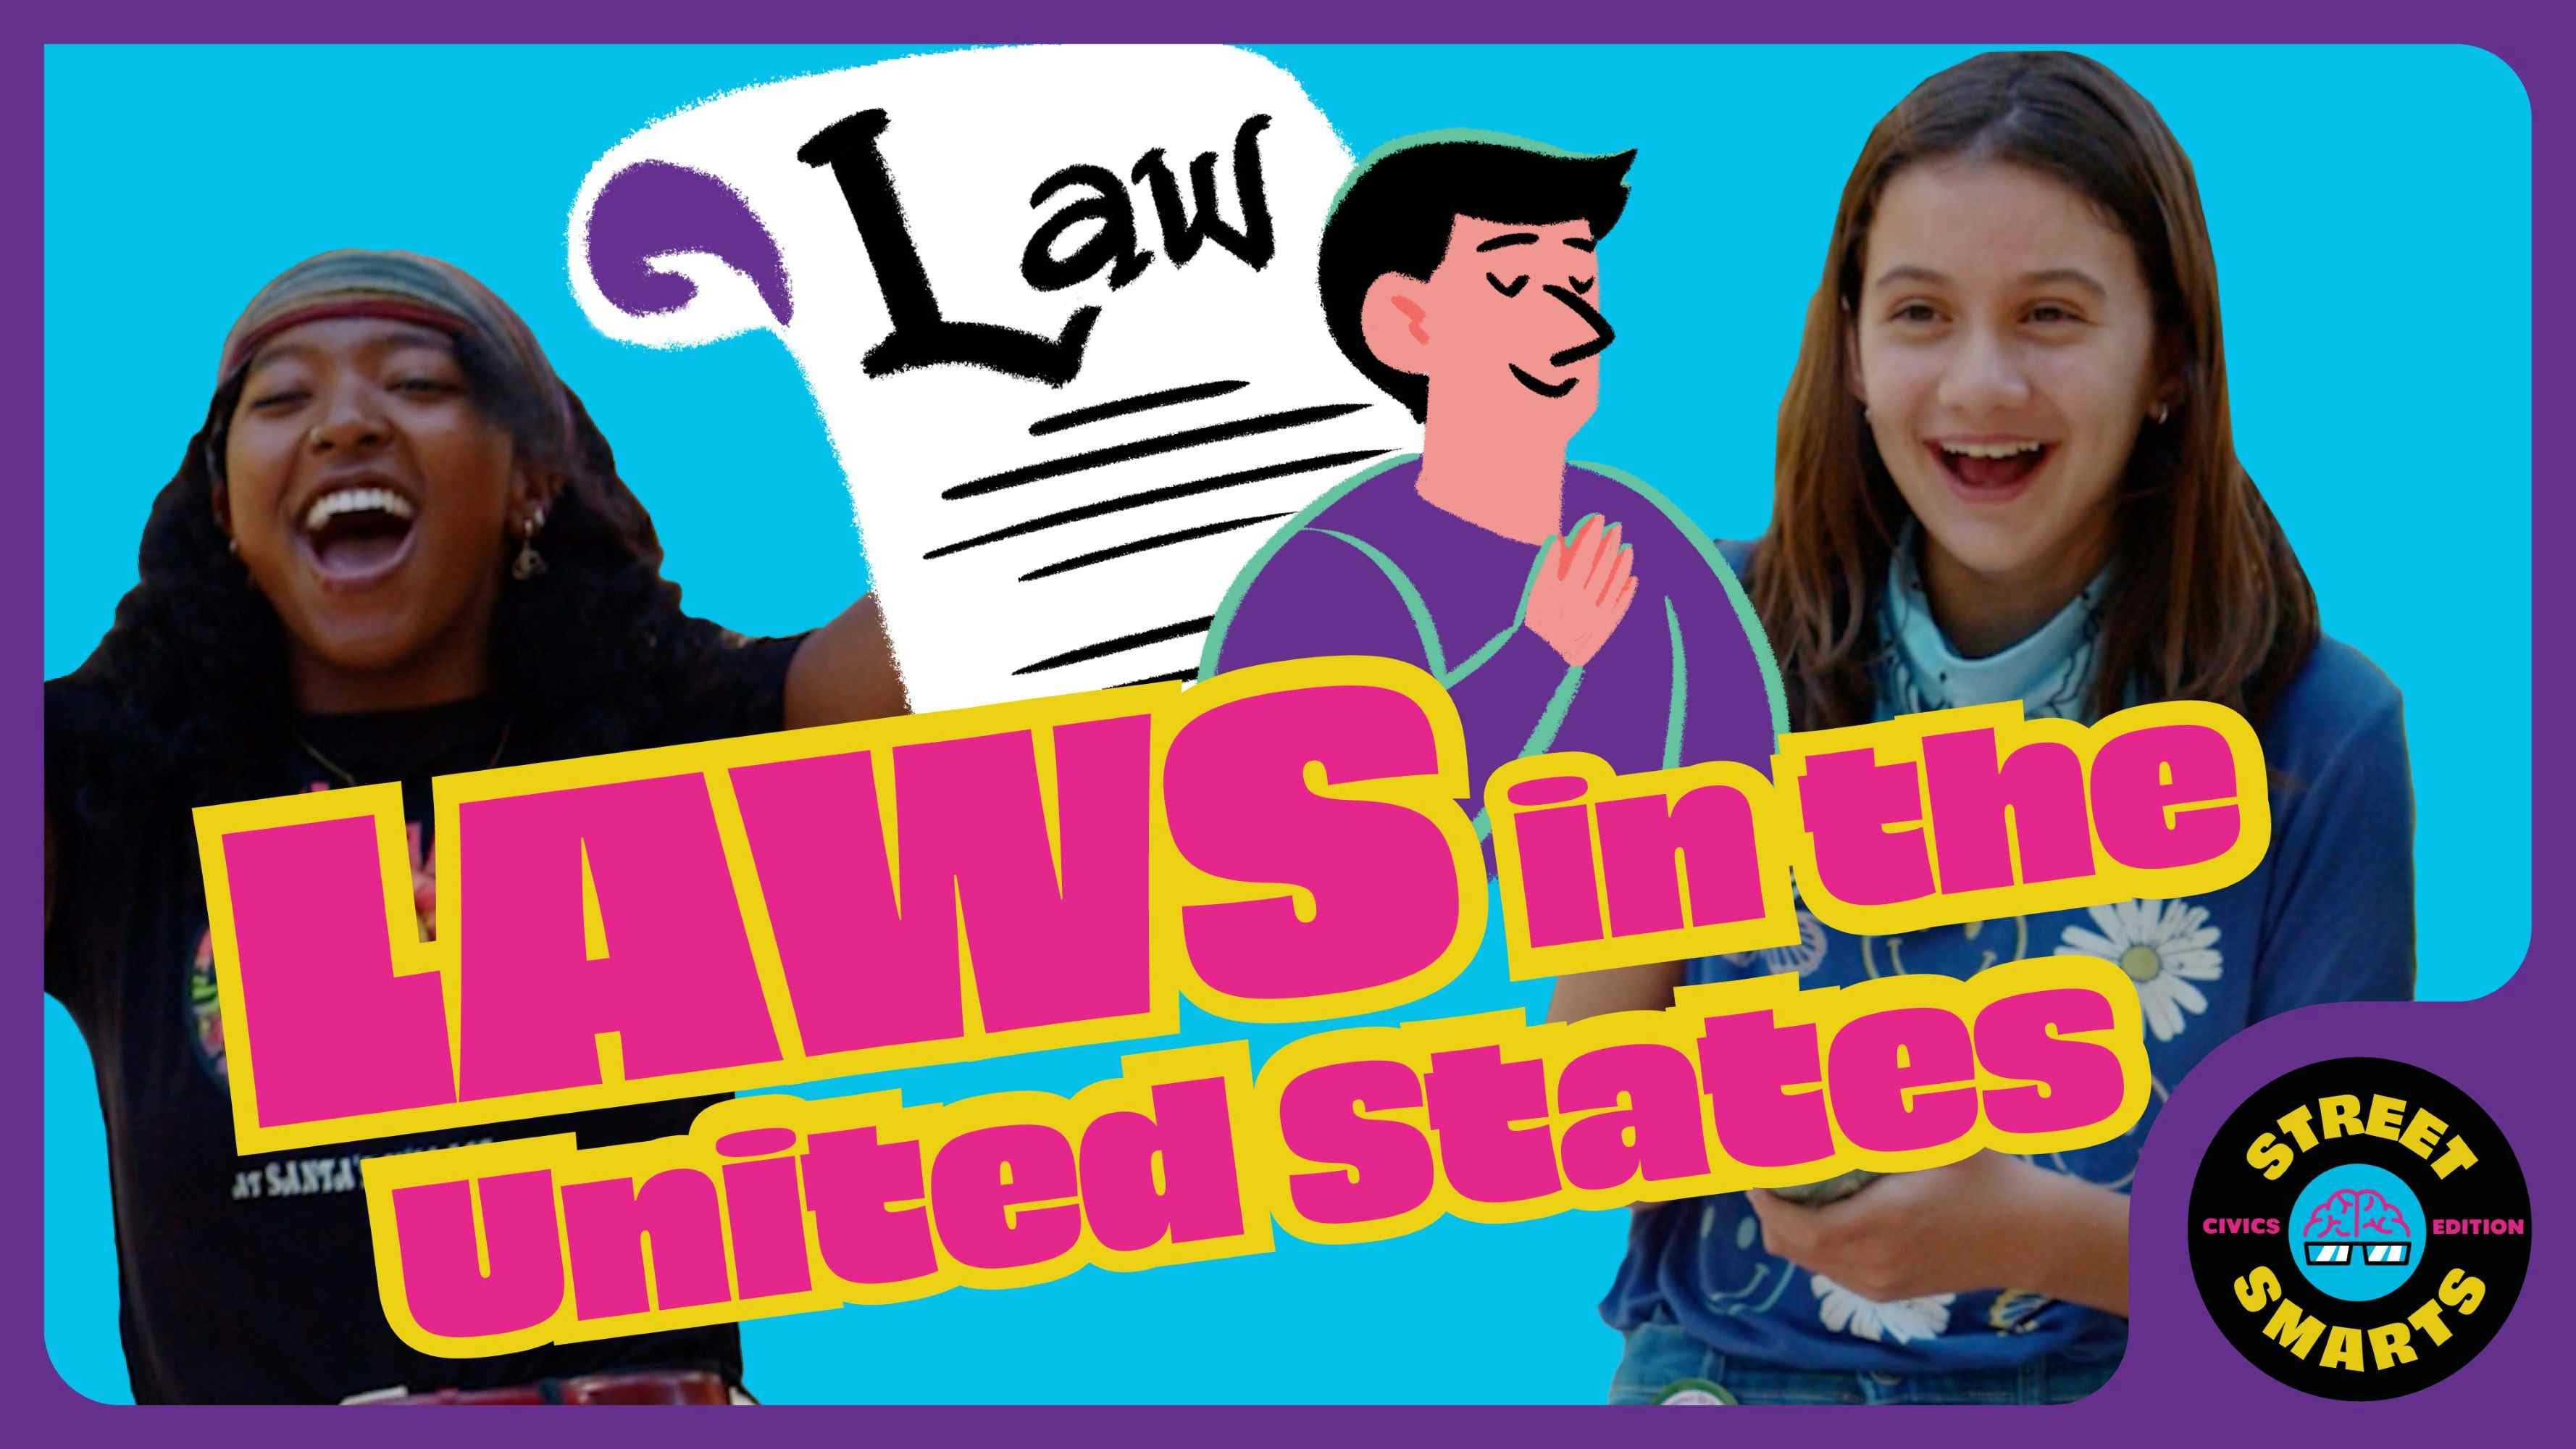 Street Smarts: Laws in the United States